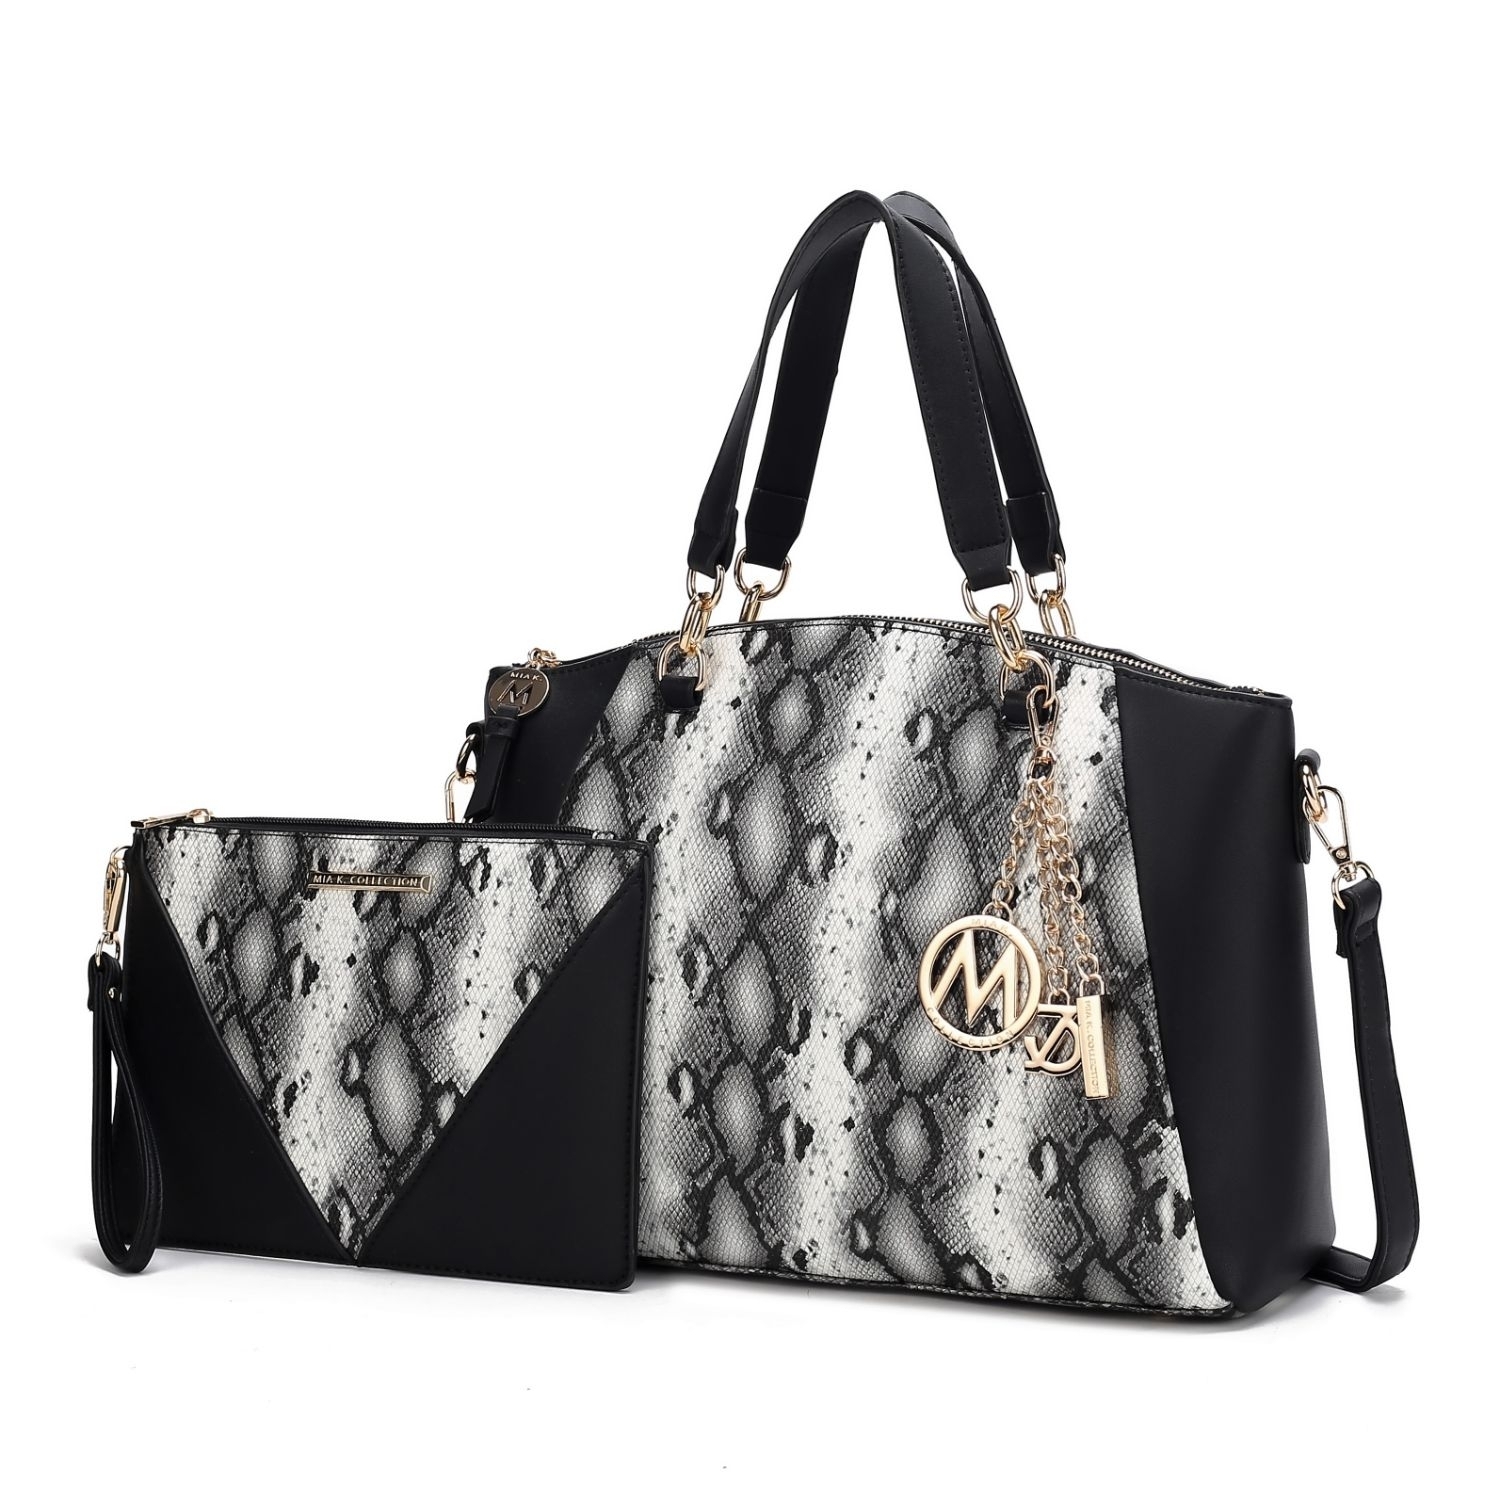 MKF Collection Addison Snake Embossed Vegan Leather Women's Tote Bag With Matching Wristlet By Mia K- 2 Pieces - Denim